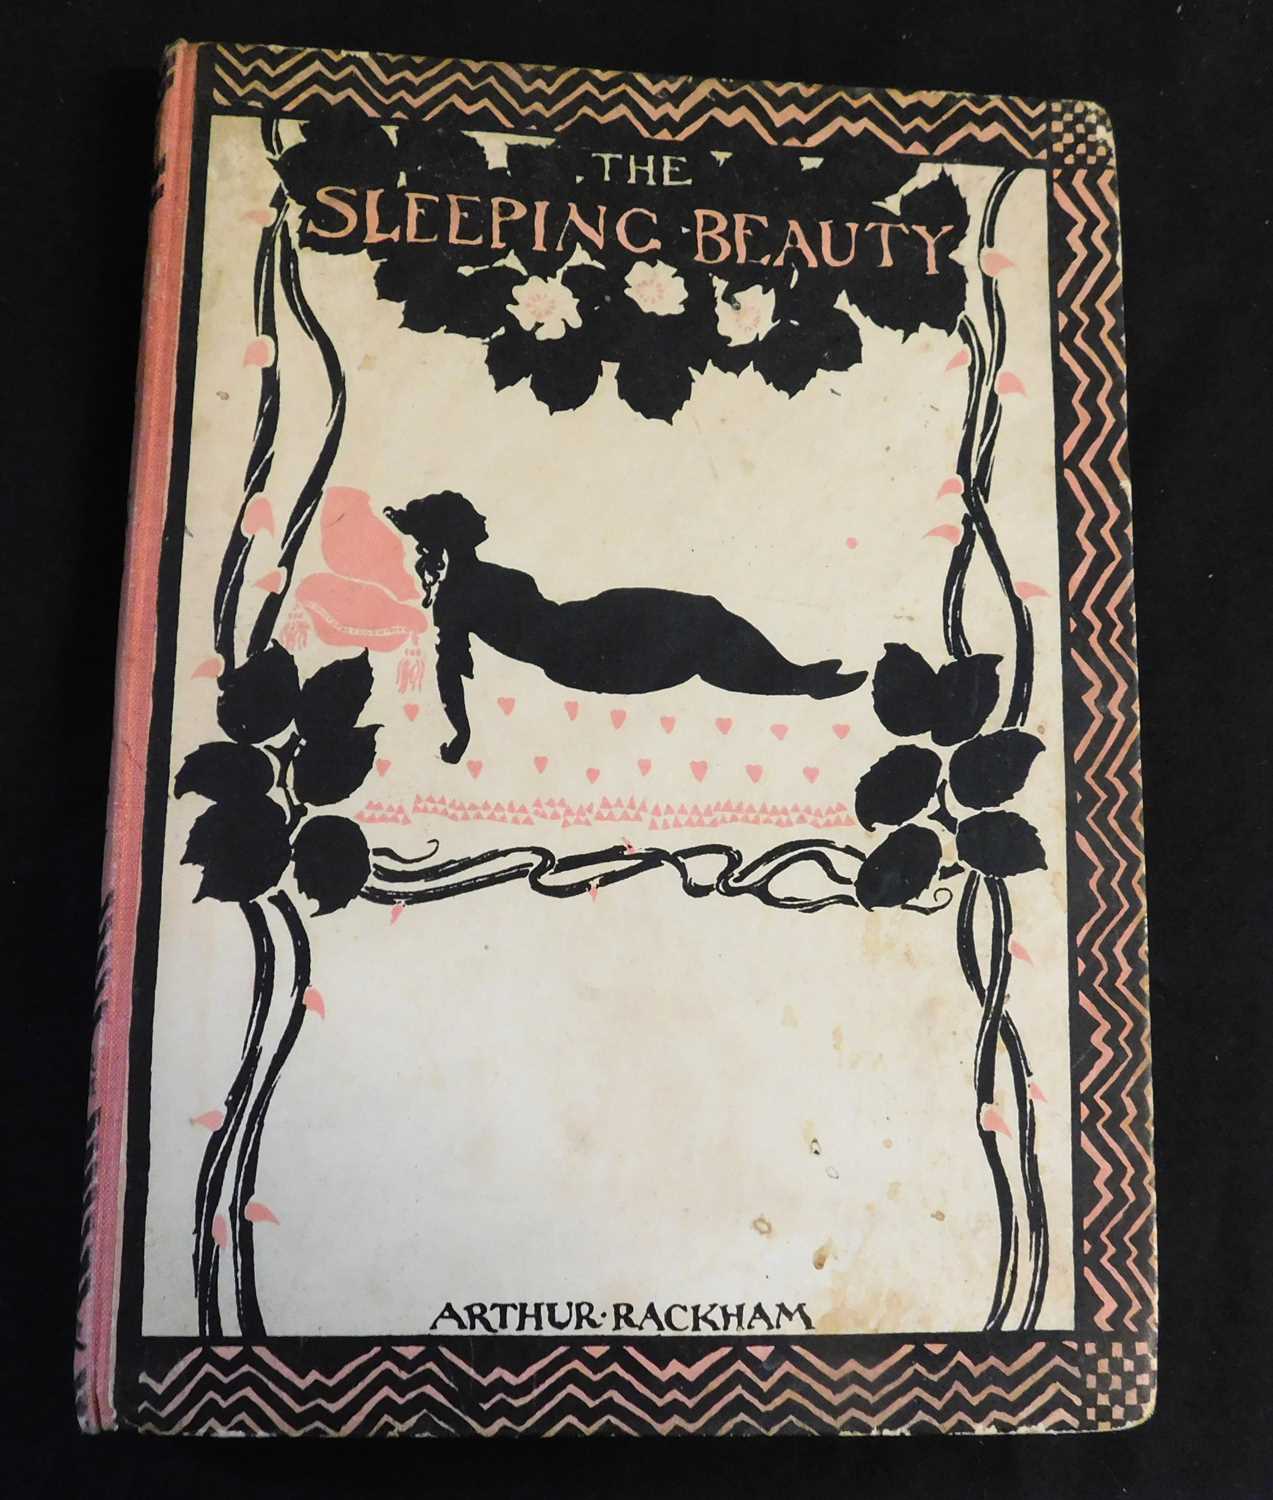 CHARLES PERRAULT: THE SLEEPING BEAUTY, adapted by Charles S Evans, ill A Rackham, London, Heinemann, - Image 2 of 2